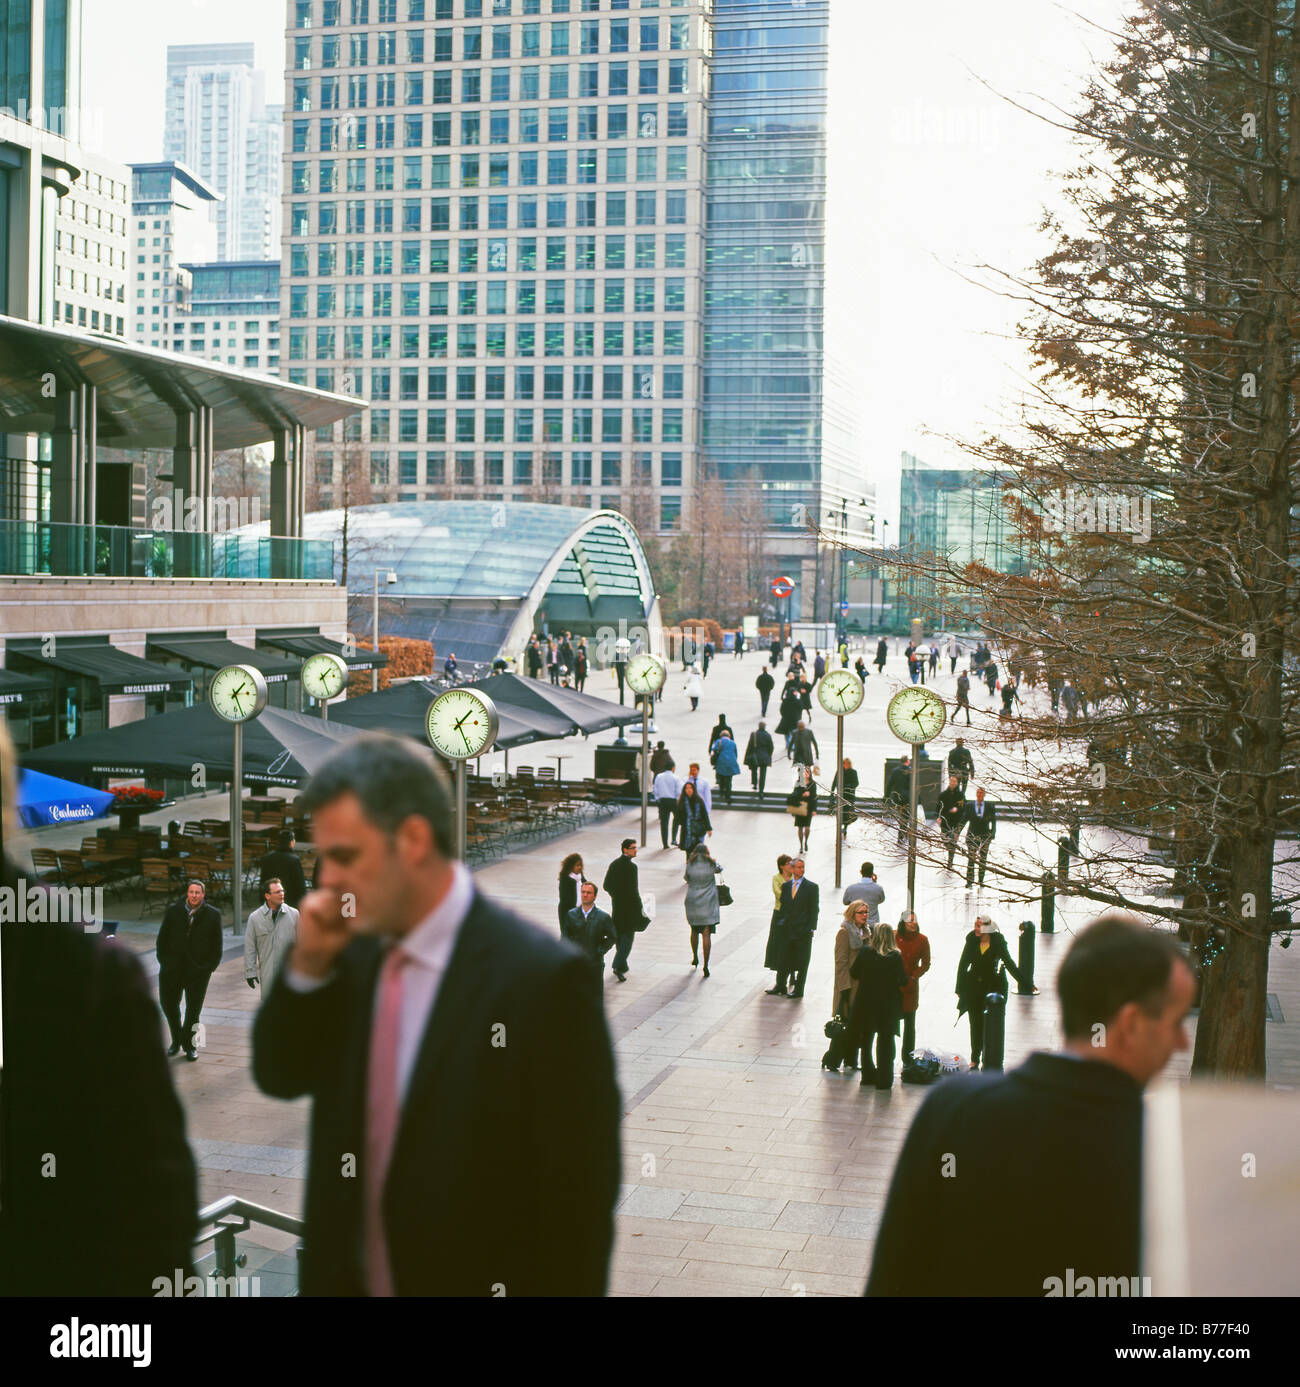 Businessman on a mobile phone and a view of Canada Square, Canary Wharf, London E14 England, UK   KATHY DEWITT Stock Photo